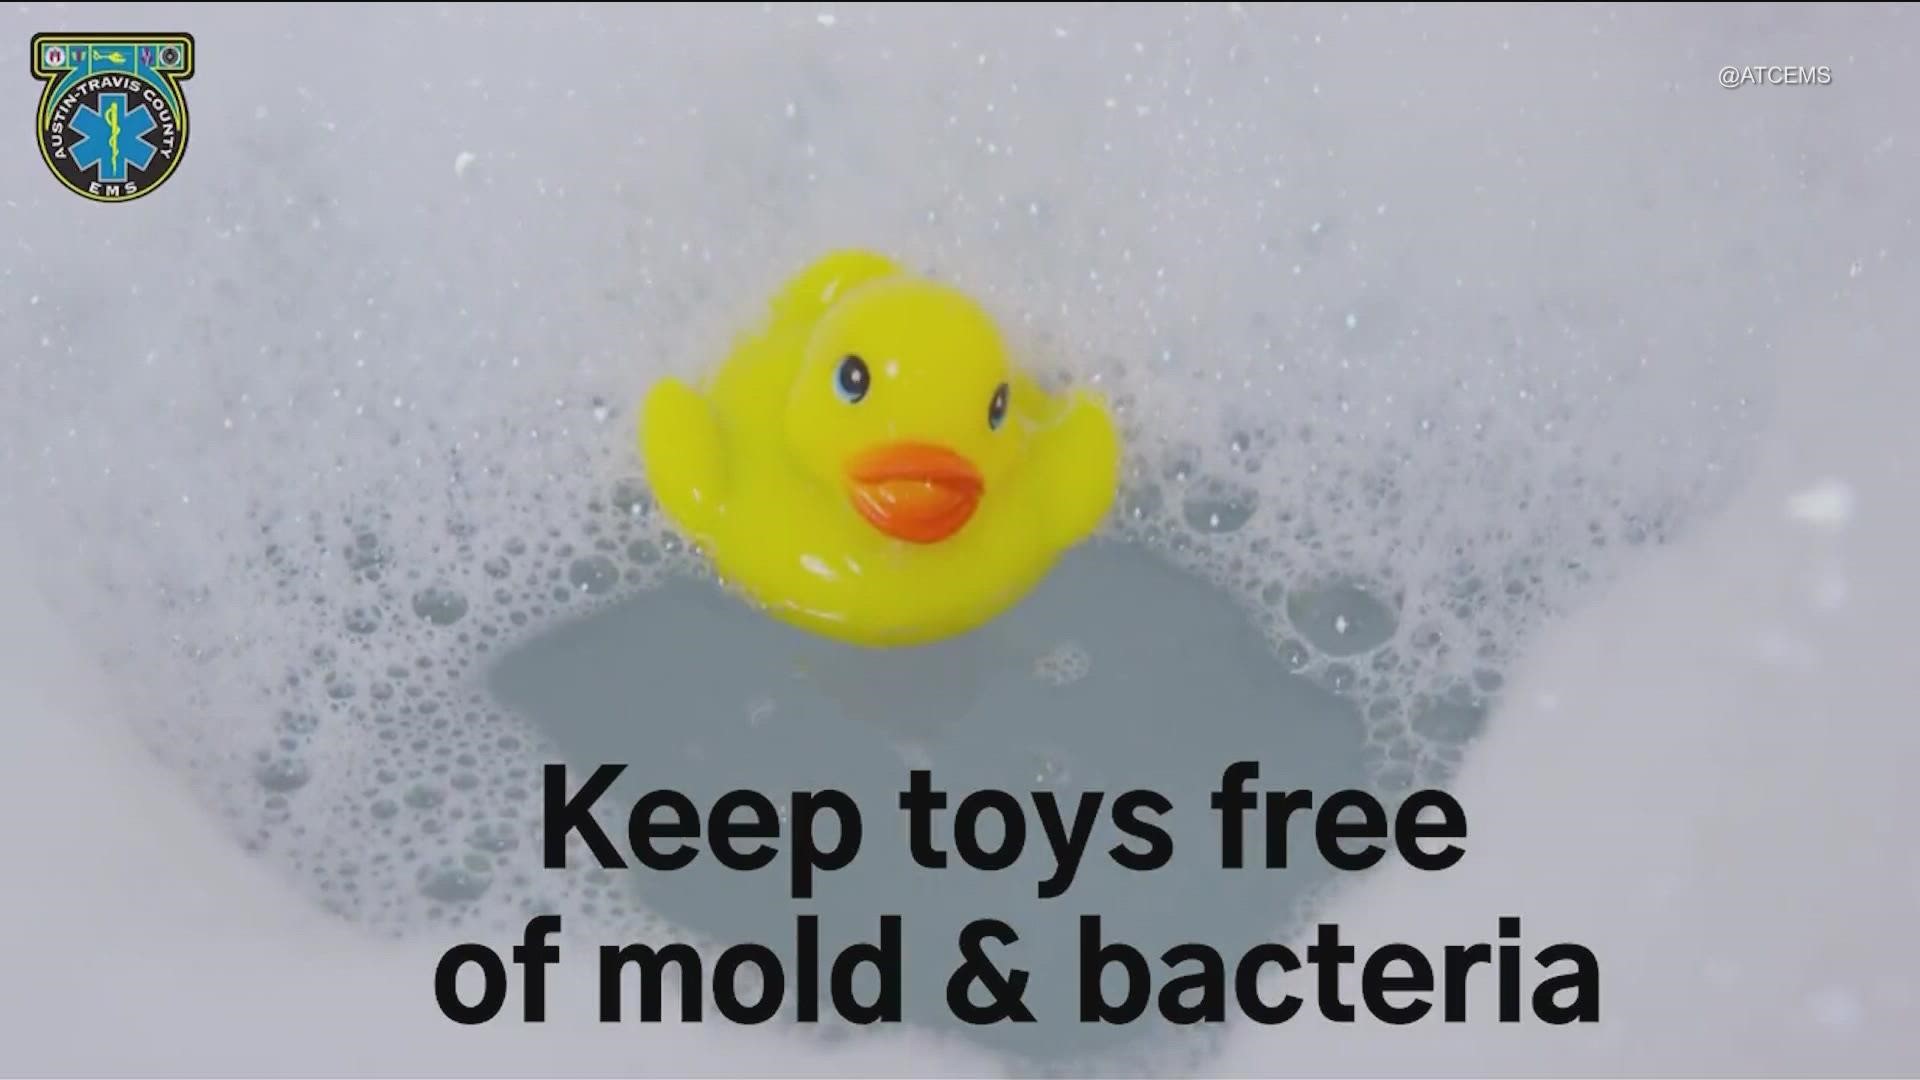 January is National Bath Safety Month as a way to help people of all ages stay safe in the bathroom, and ATCEMS is providing tips on how to do so.